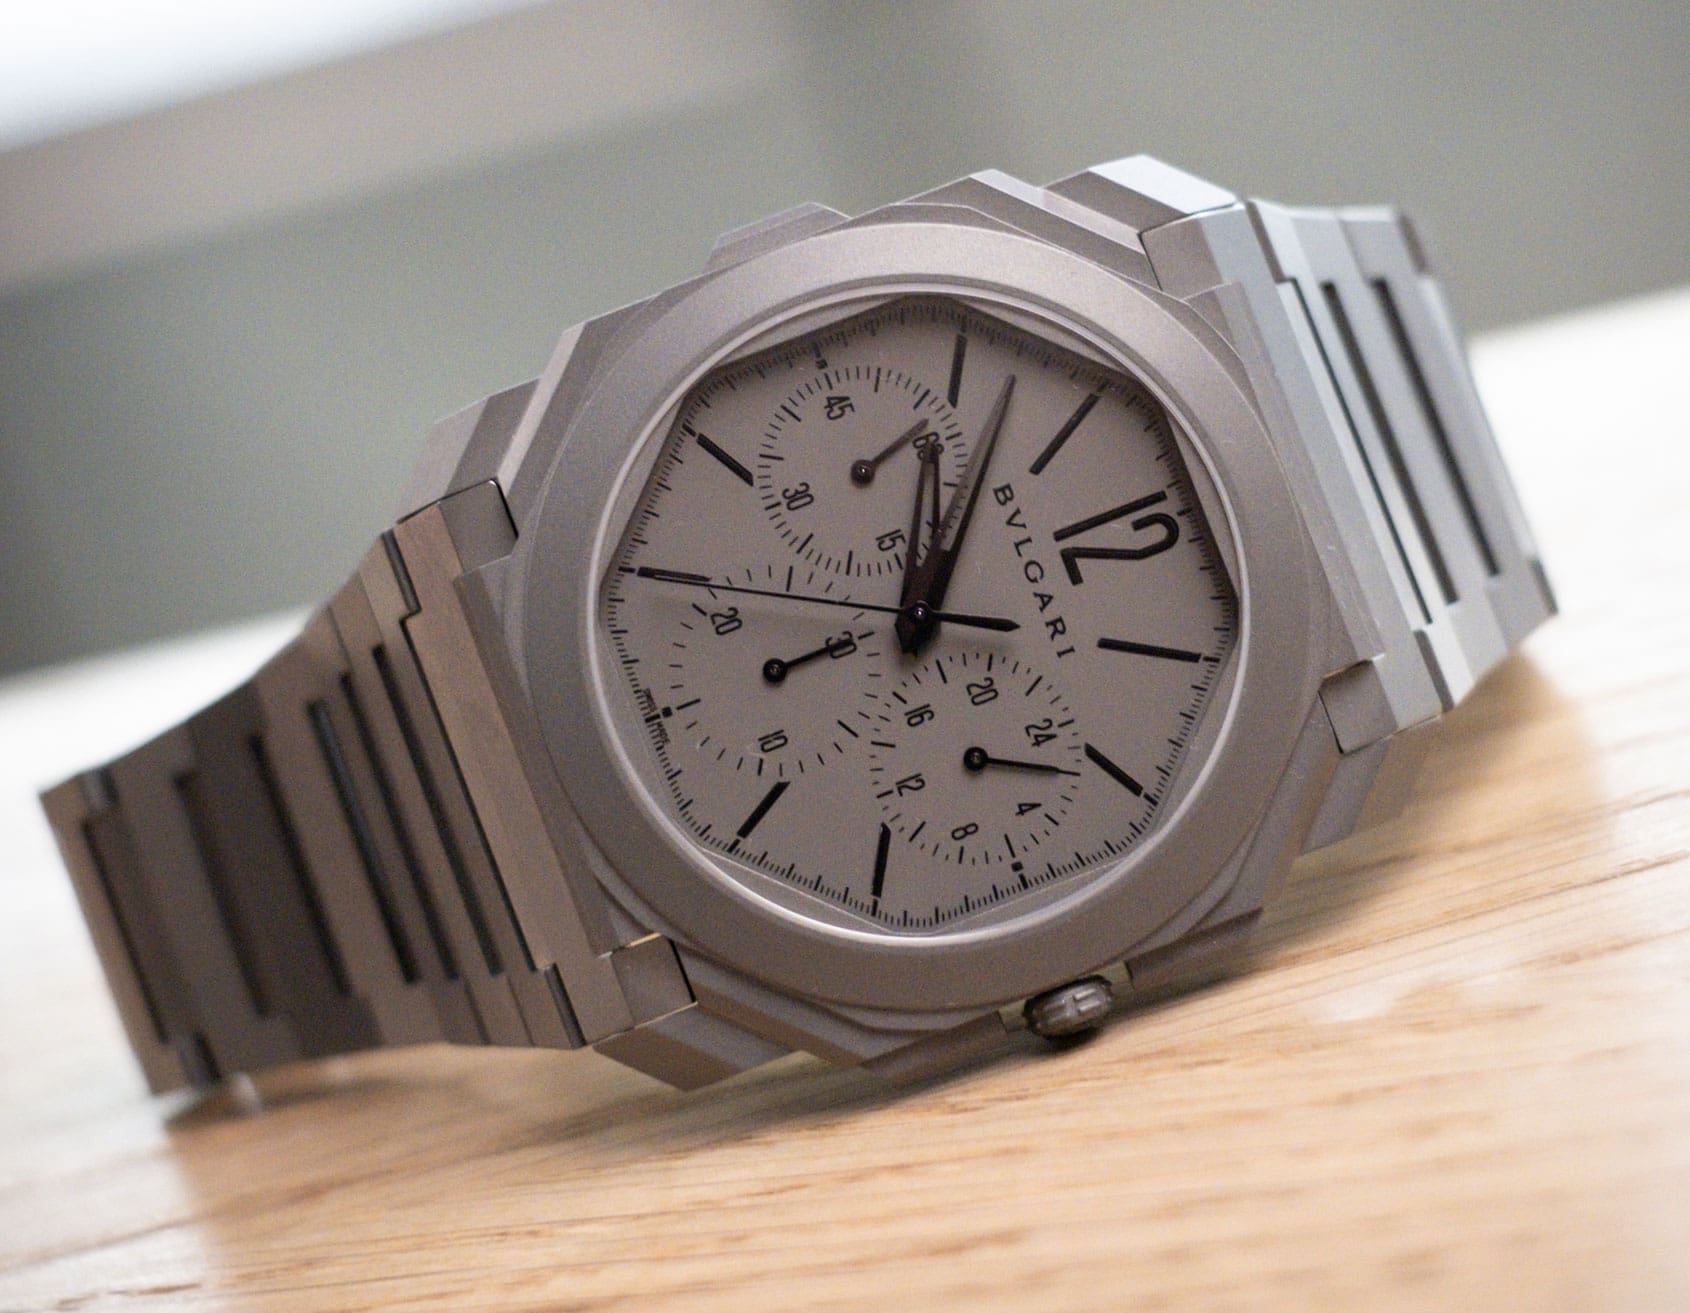 HANDS-ON: Thin just got complicated with the Bulgari Octo Finissimo Chronograph 